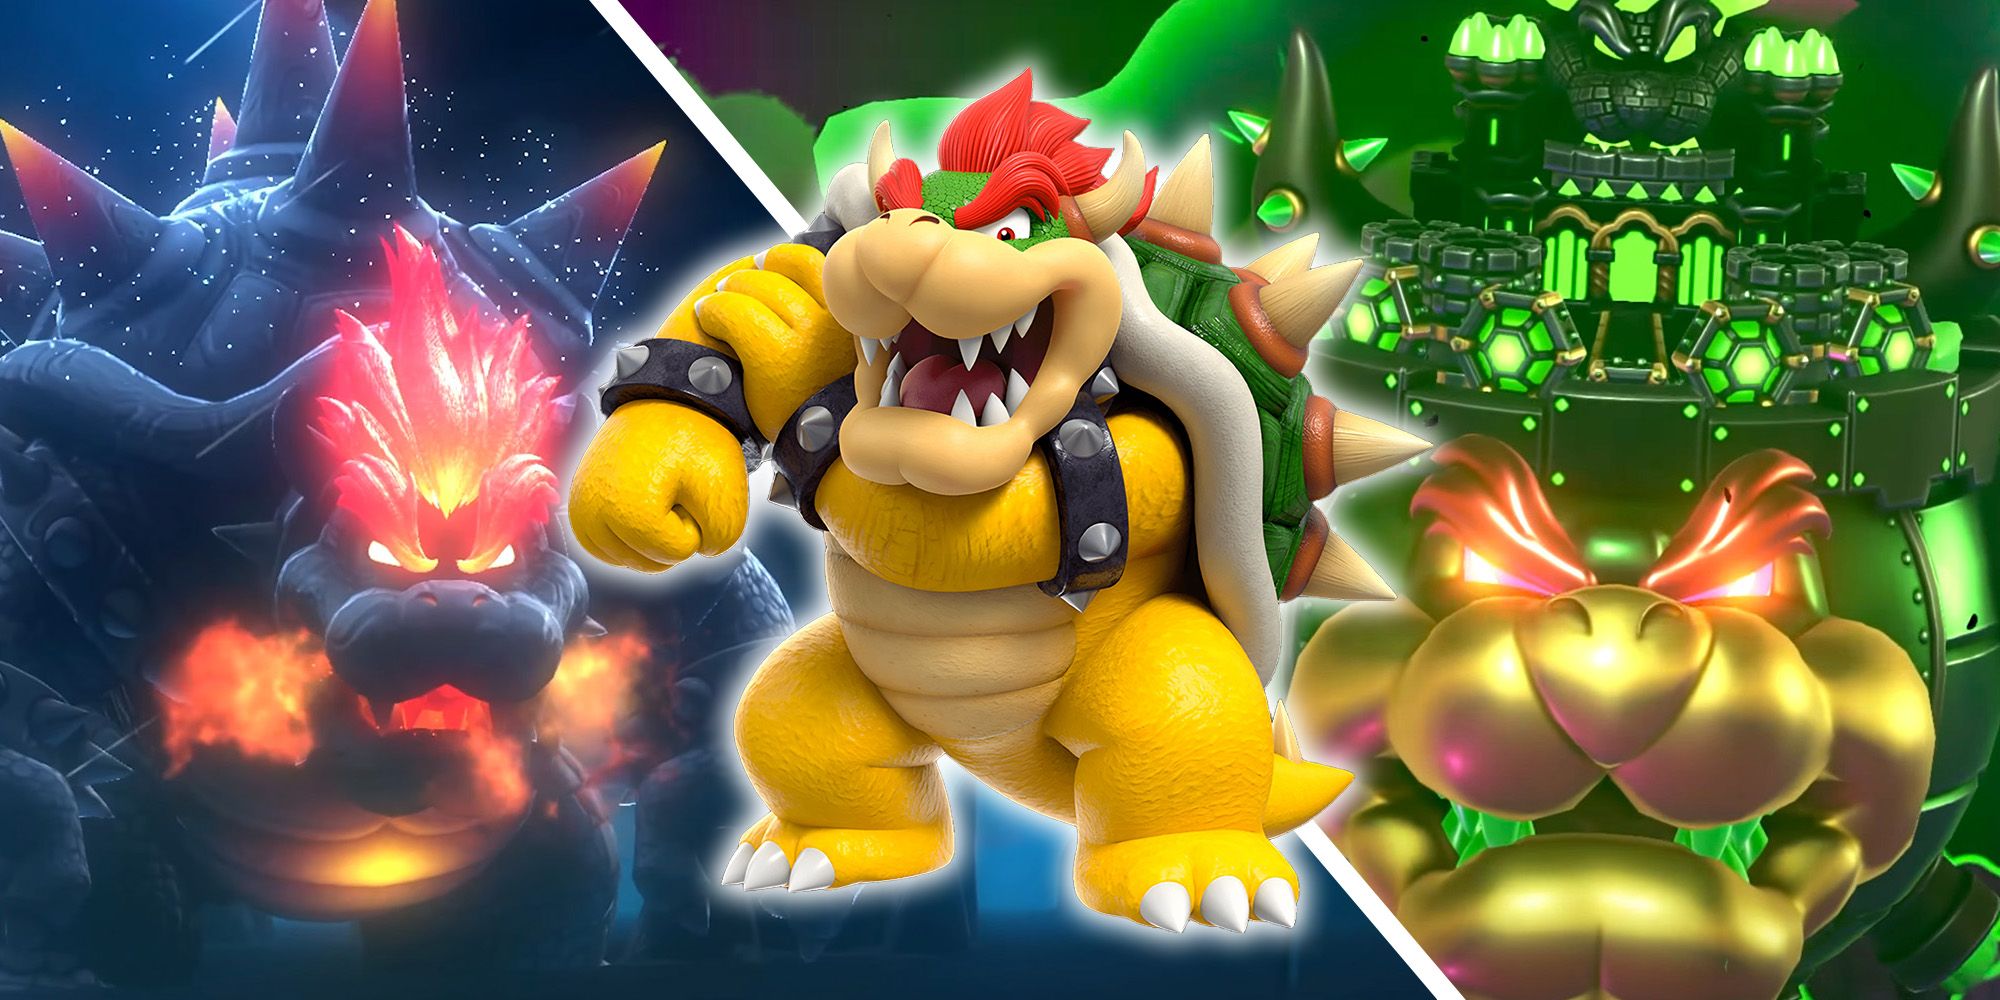 Super Mario: Every Version Of Bowser Ranked - Split image of Fury Bowser from Bowser's Fury and Castle Bowser from Super Mario Bros Wonder